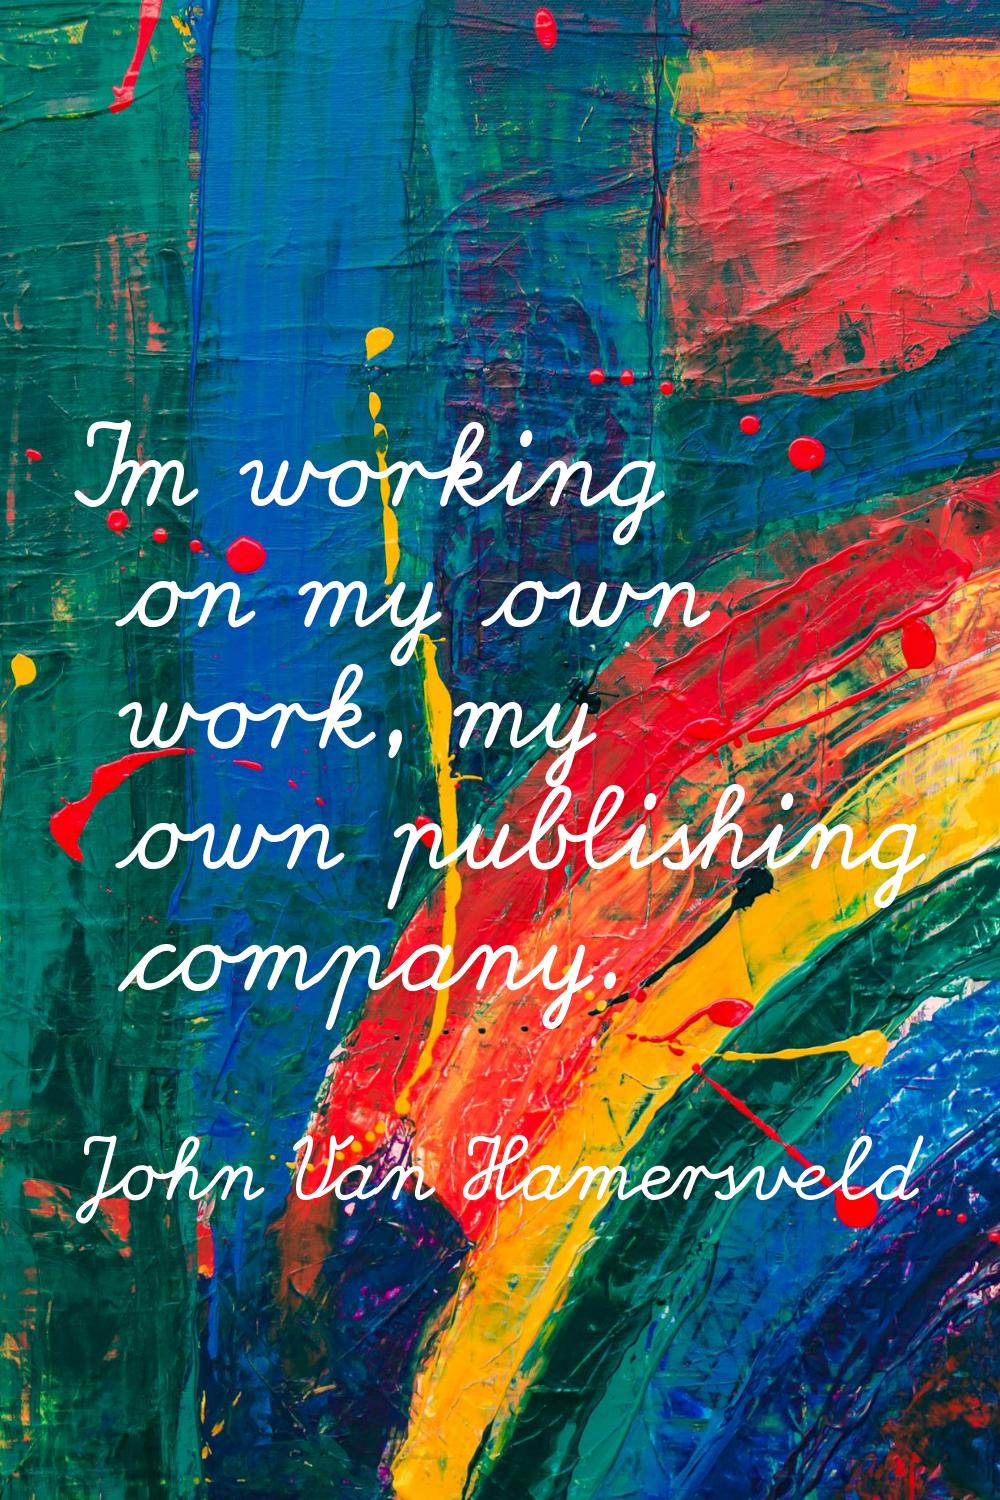 I'm working on my own work, my own publishing company.